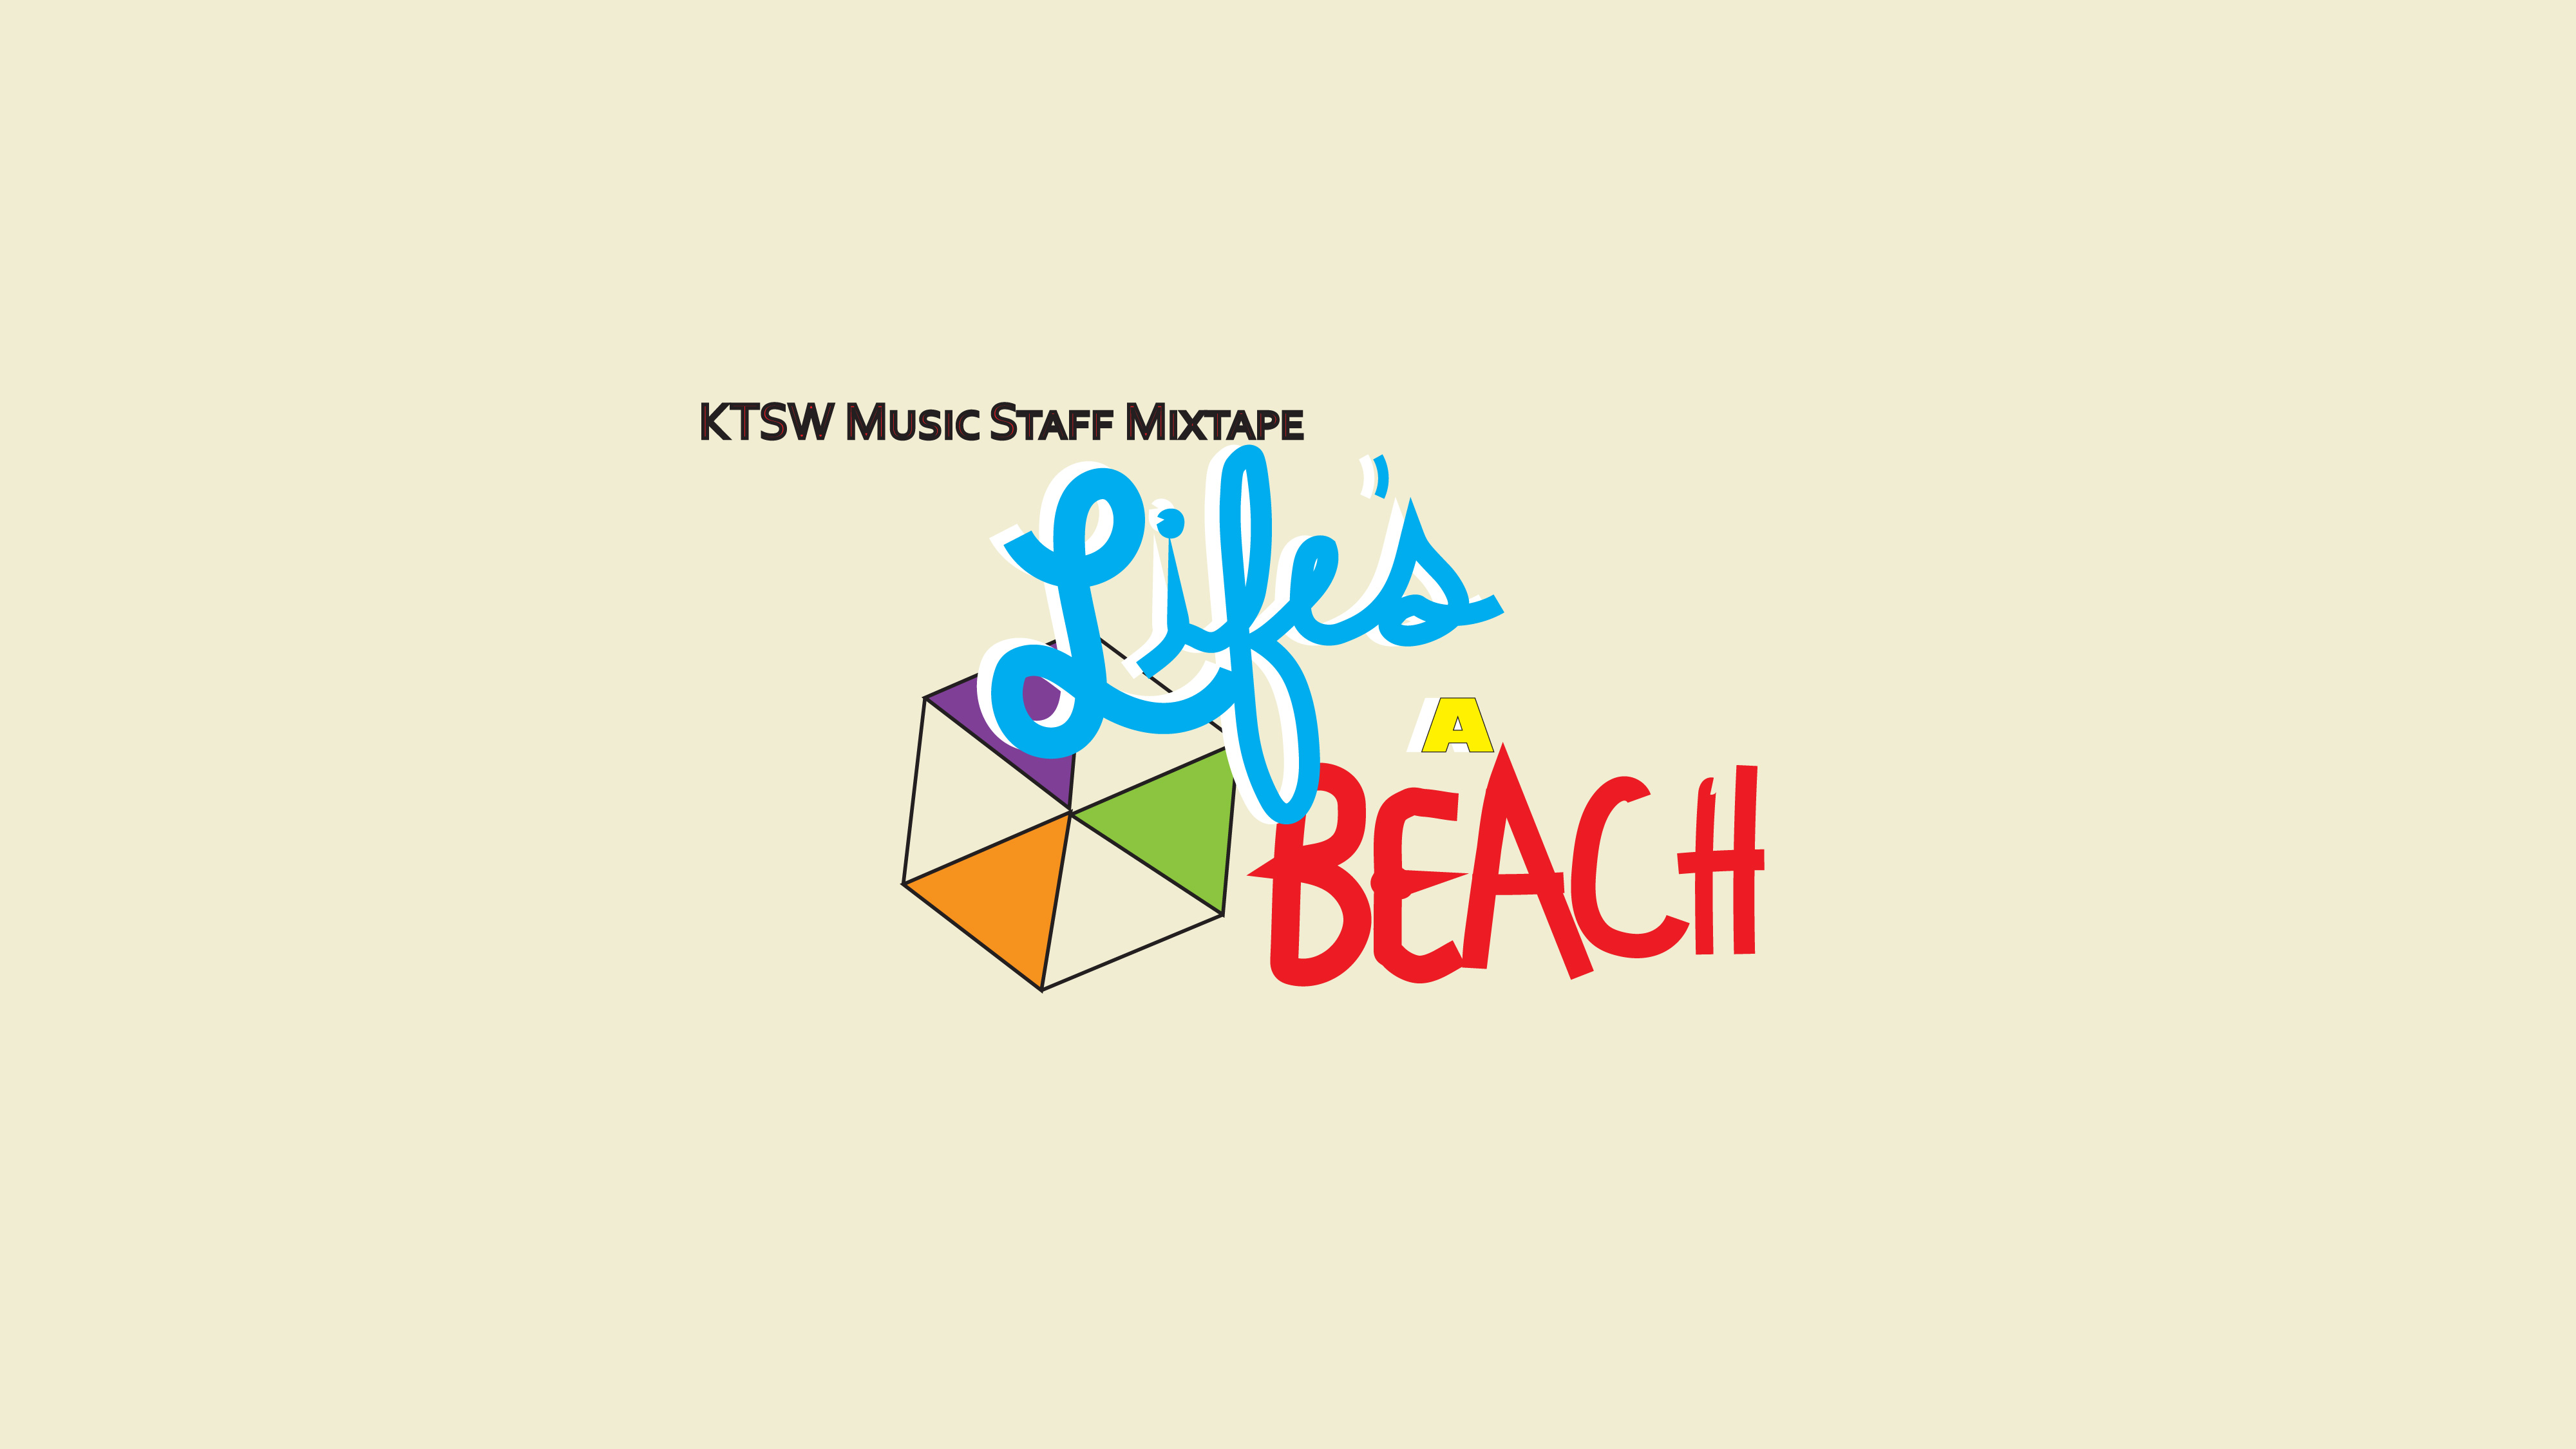 A simplified umbrella with orange, purple, and green panels and the phrase “Music Staff Mixtape: Life’s A Beach” in blue, yellow and red text on a sandy-colored background.